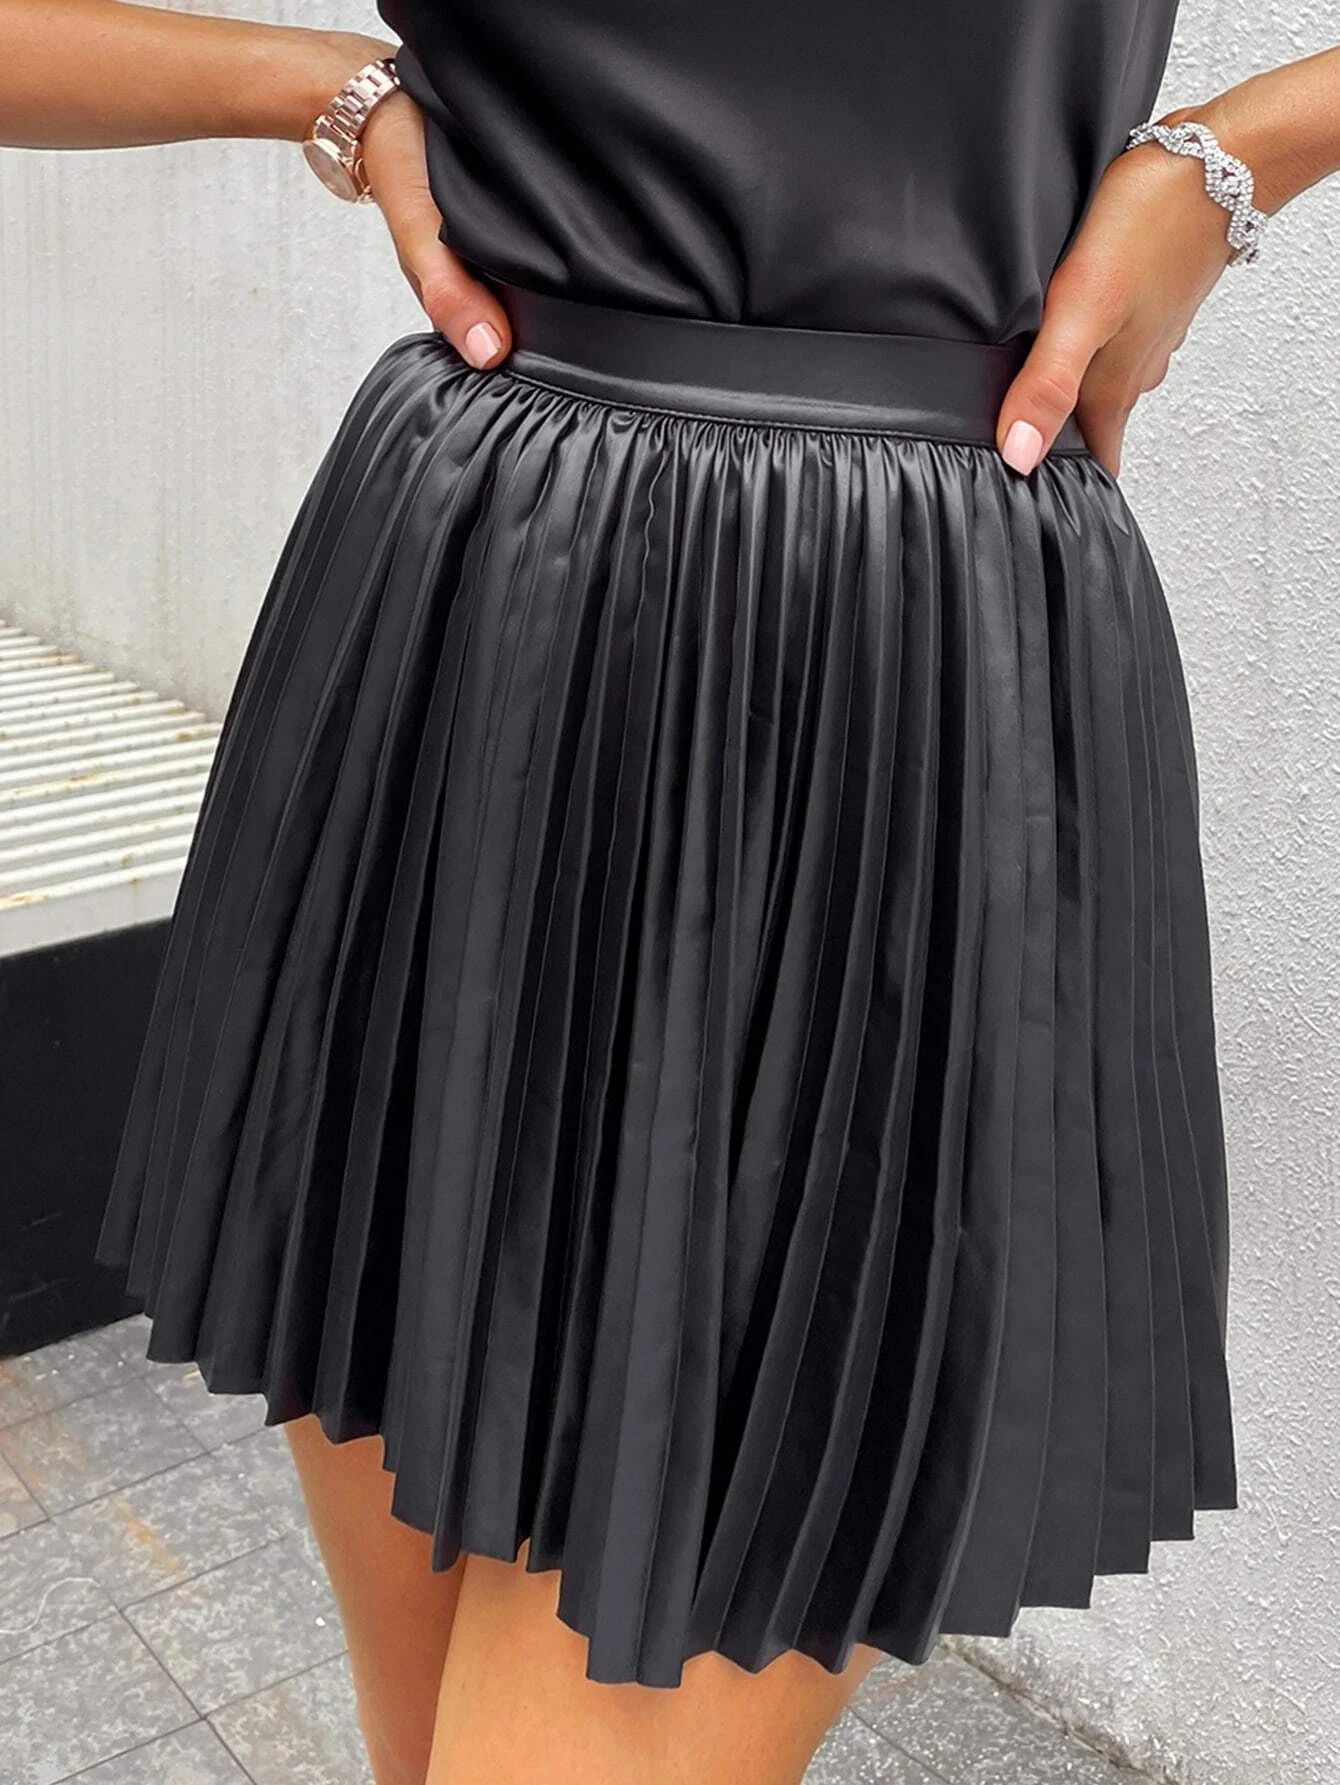 Sollinarry PU Leather Pleated Skirt | SHEIN